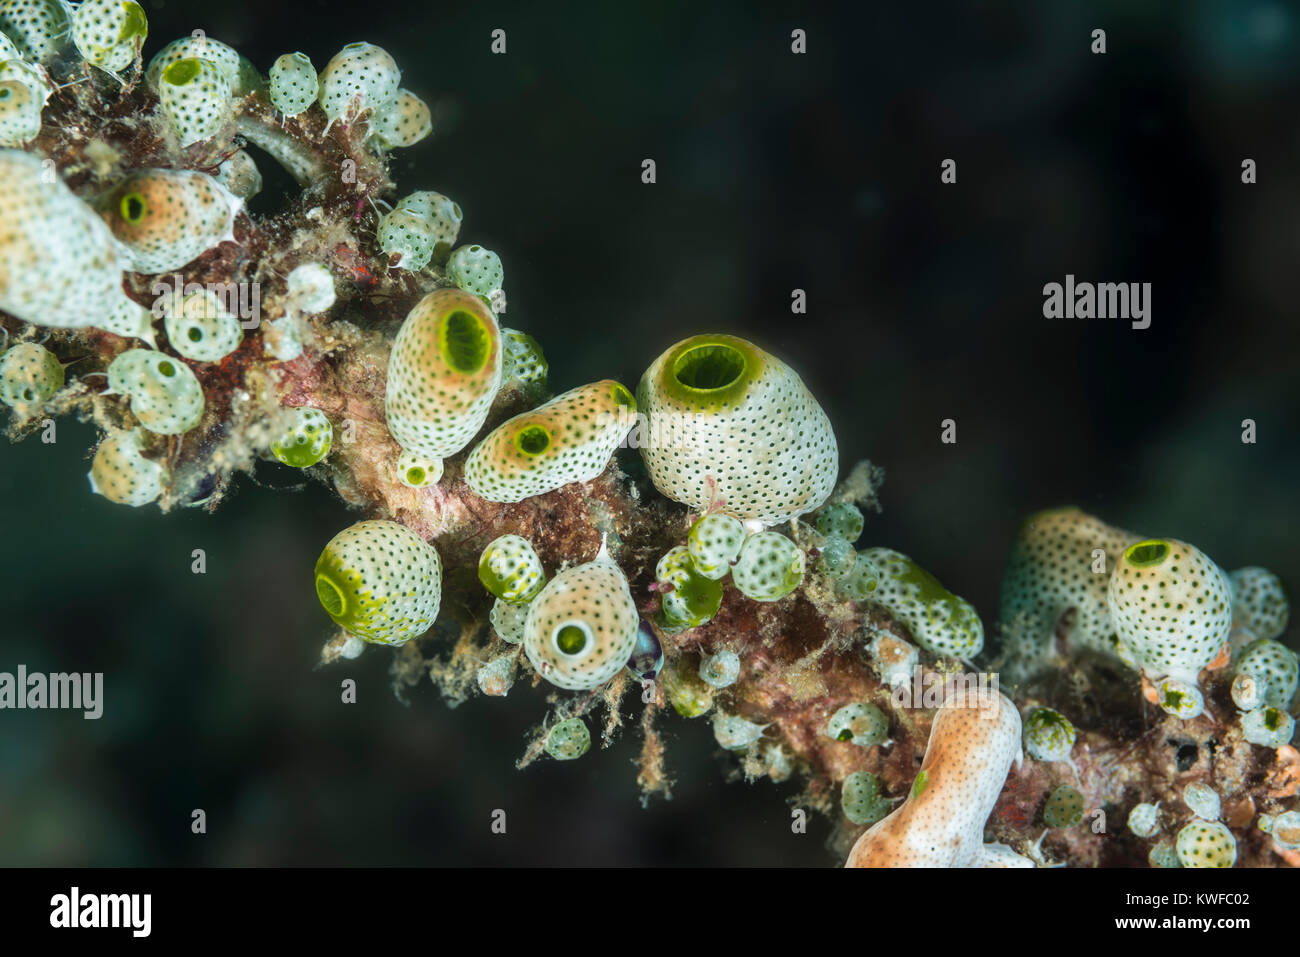 Soft corals growing on a coral branch Stock Photo - Alamy